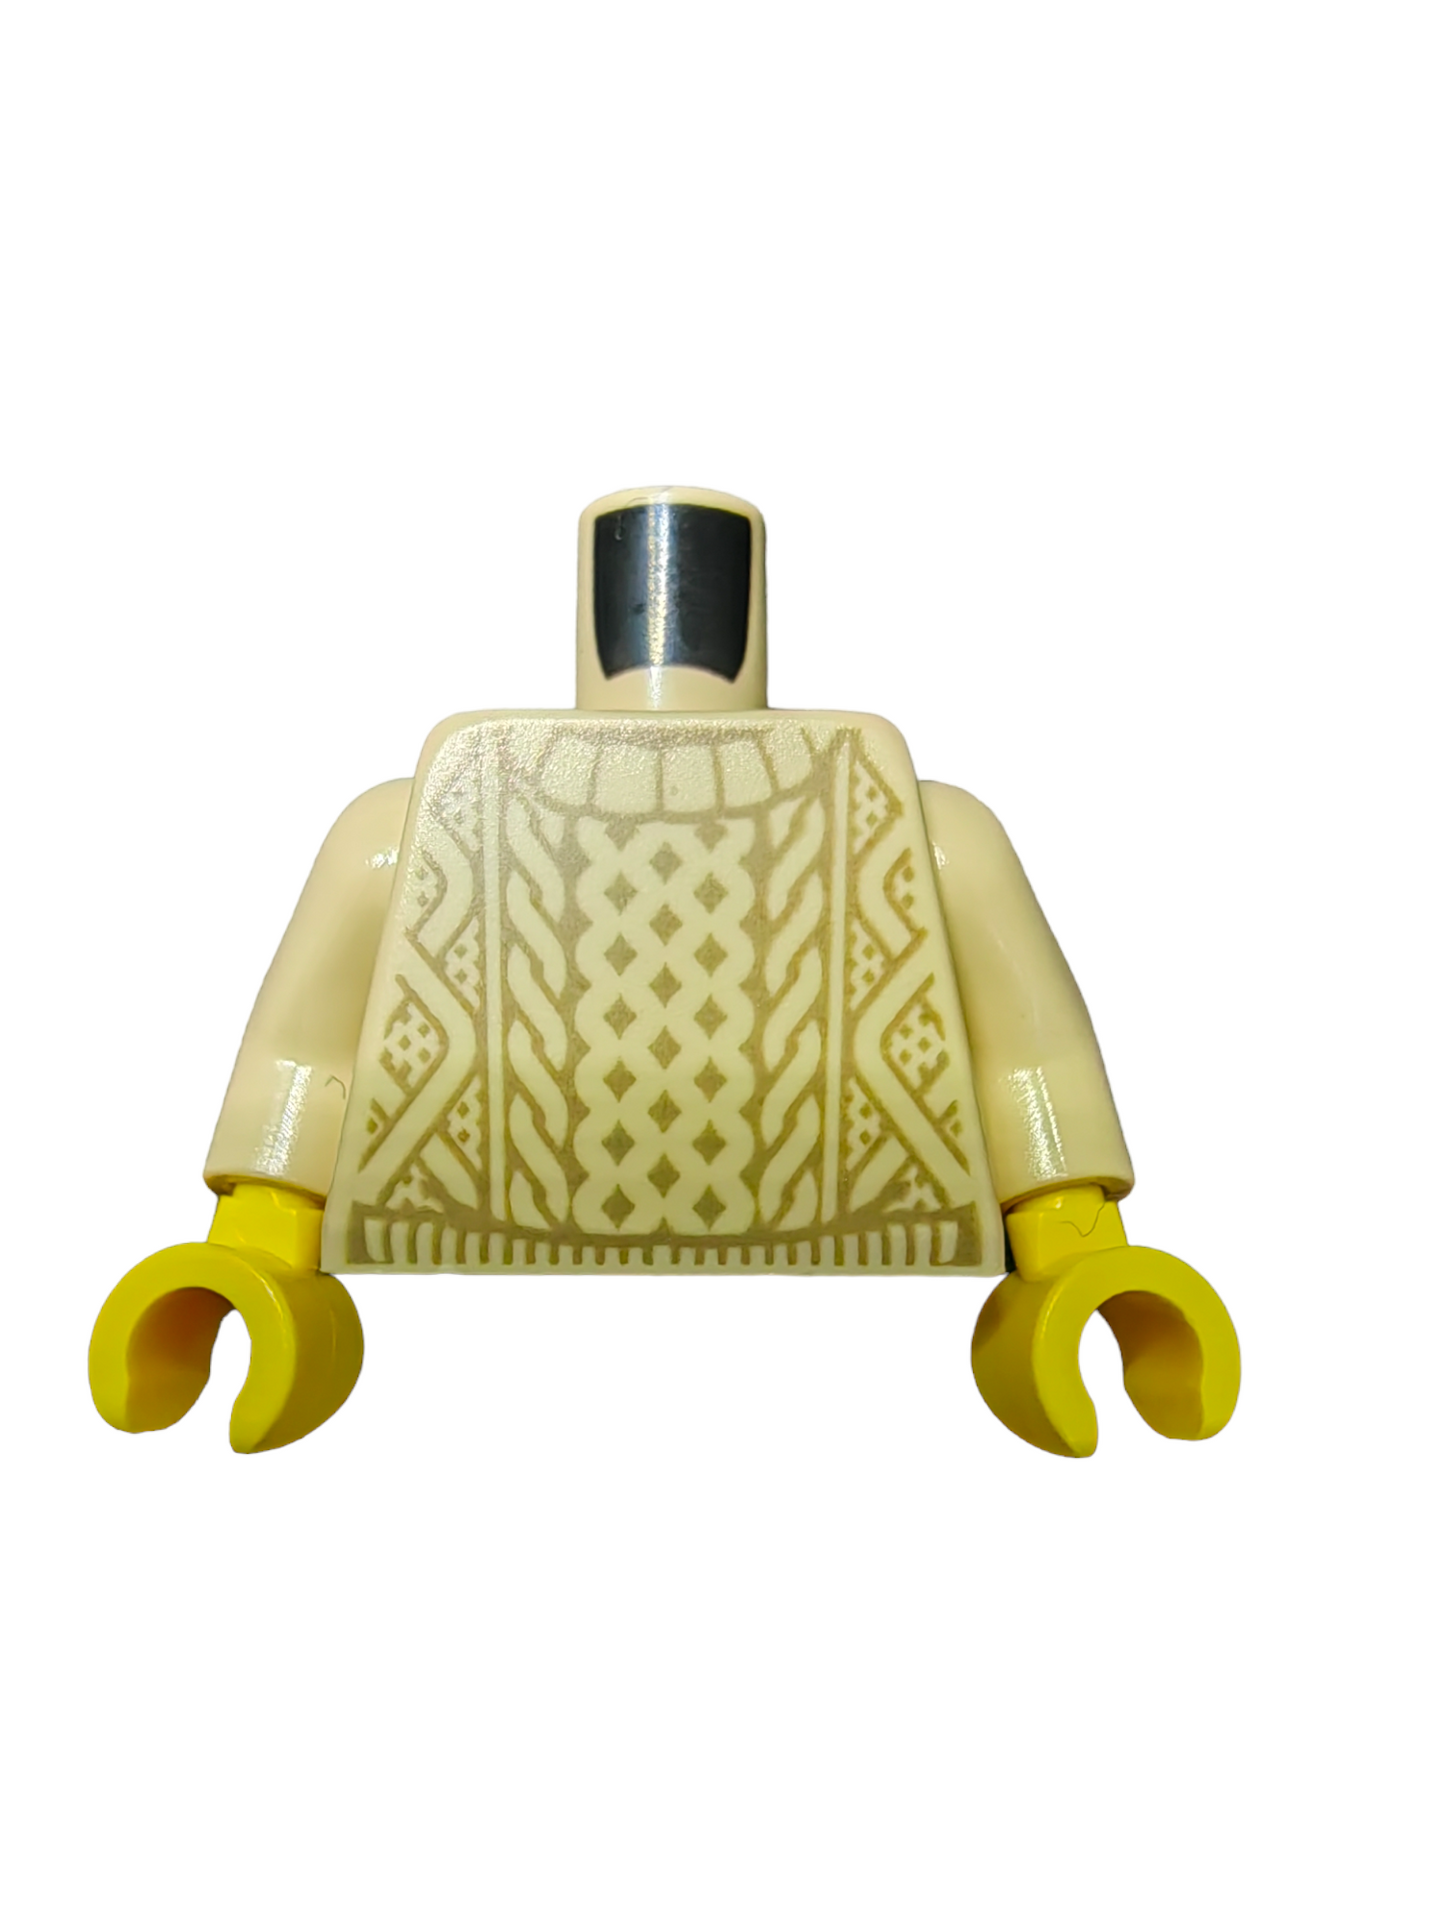 LEGO Torso, Knitted Wooly Jumper with Dark Tan Pattern - UB1425